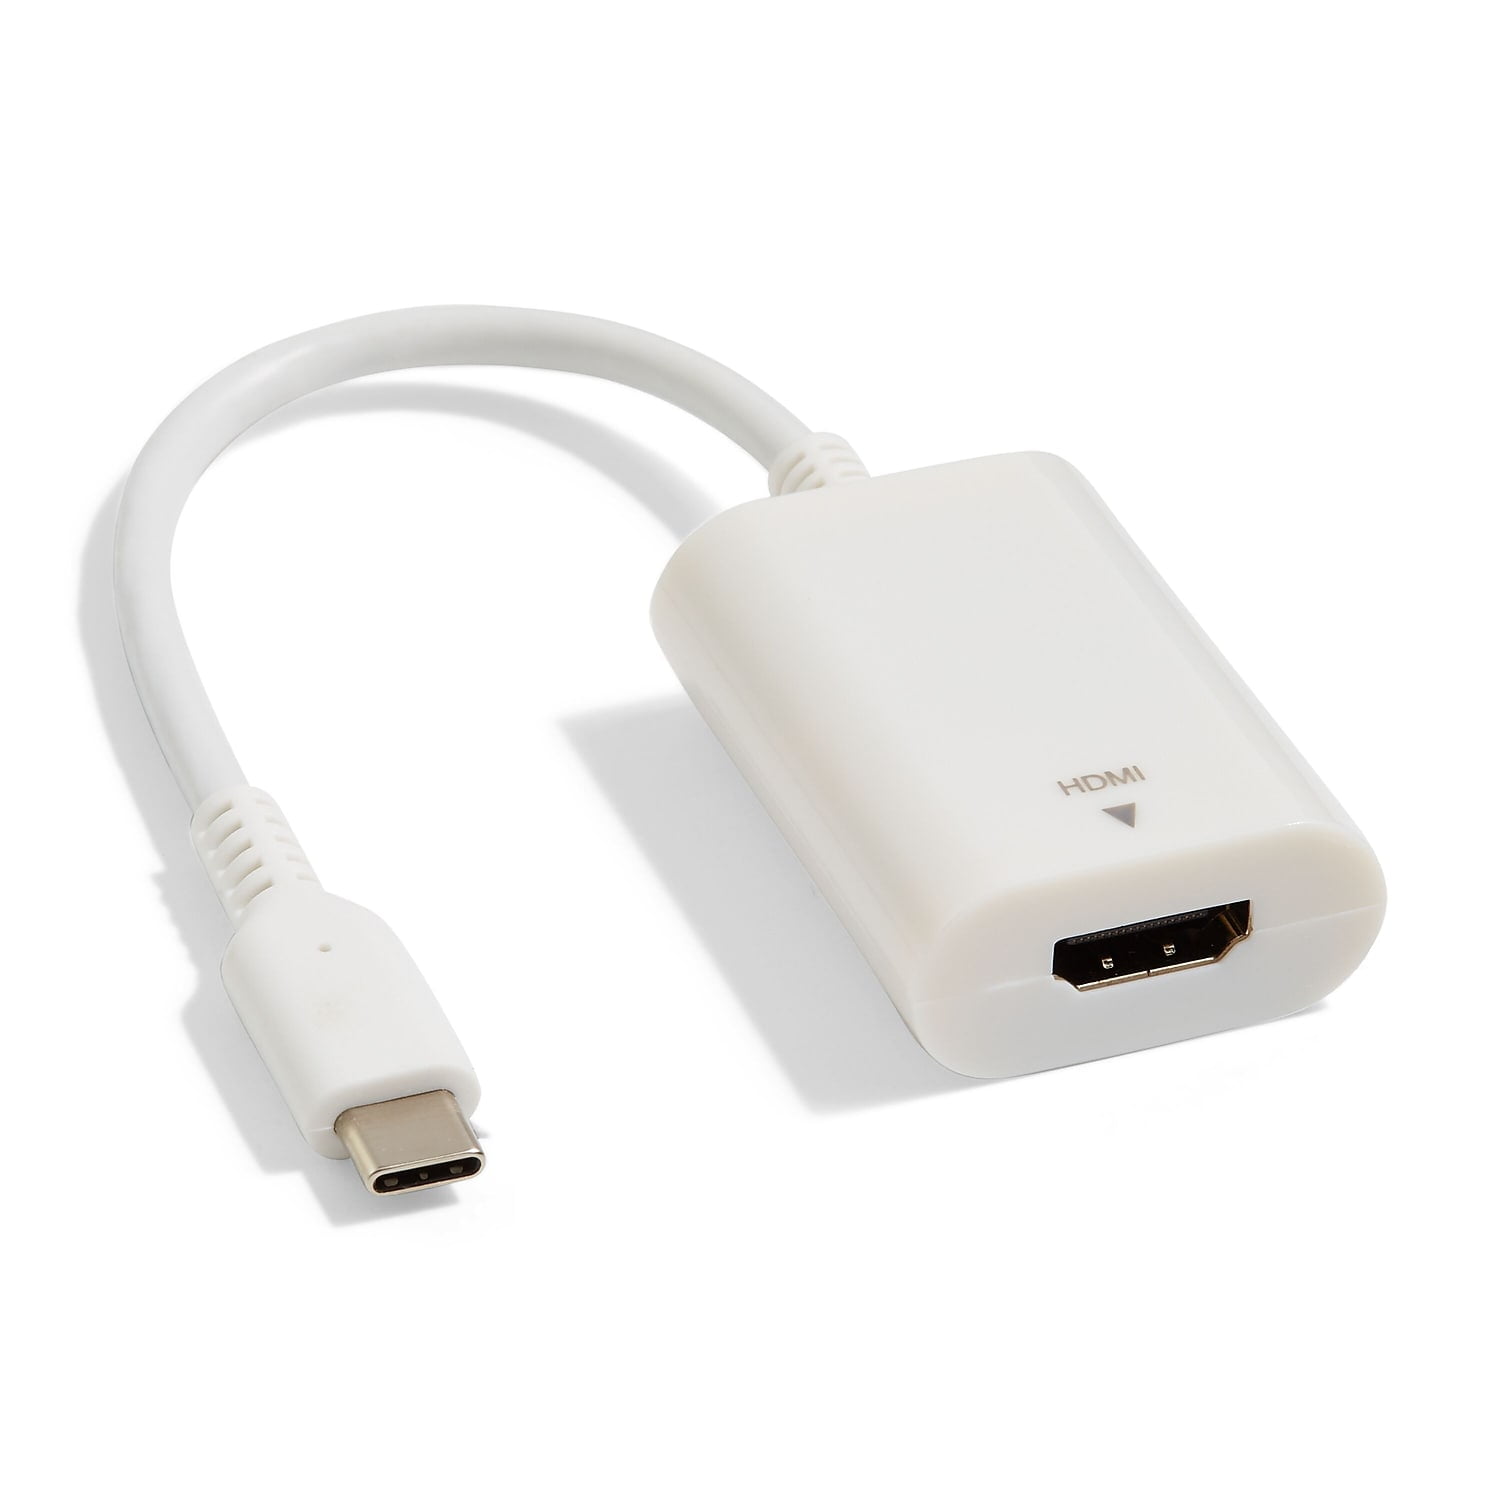 HDMI Converter for Wii for Wii U - Bitcoin & Lightning accepted